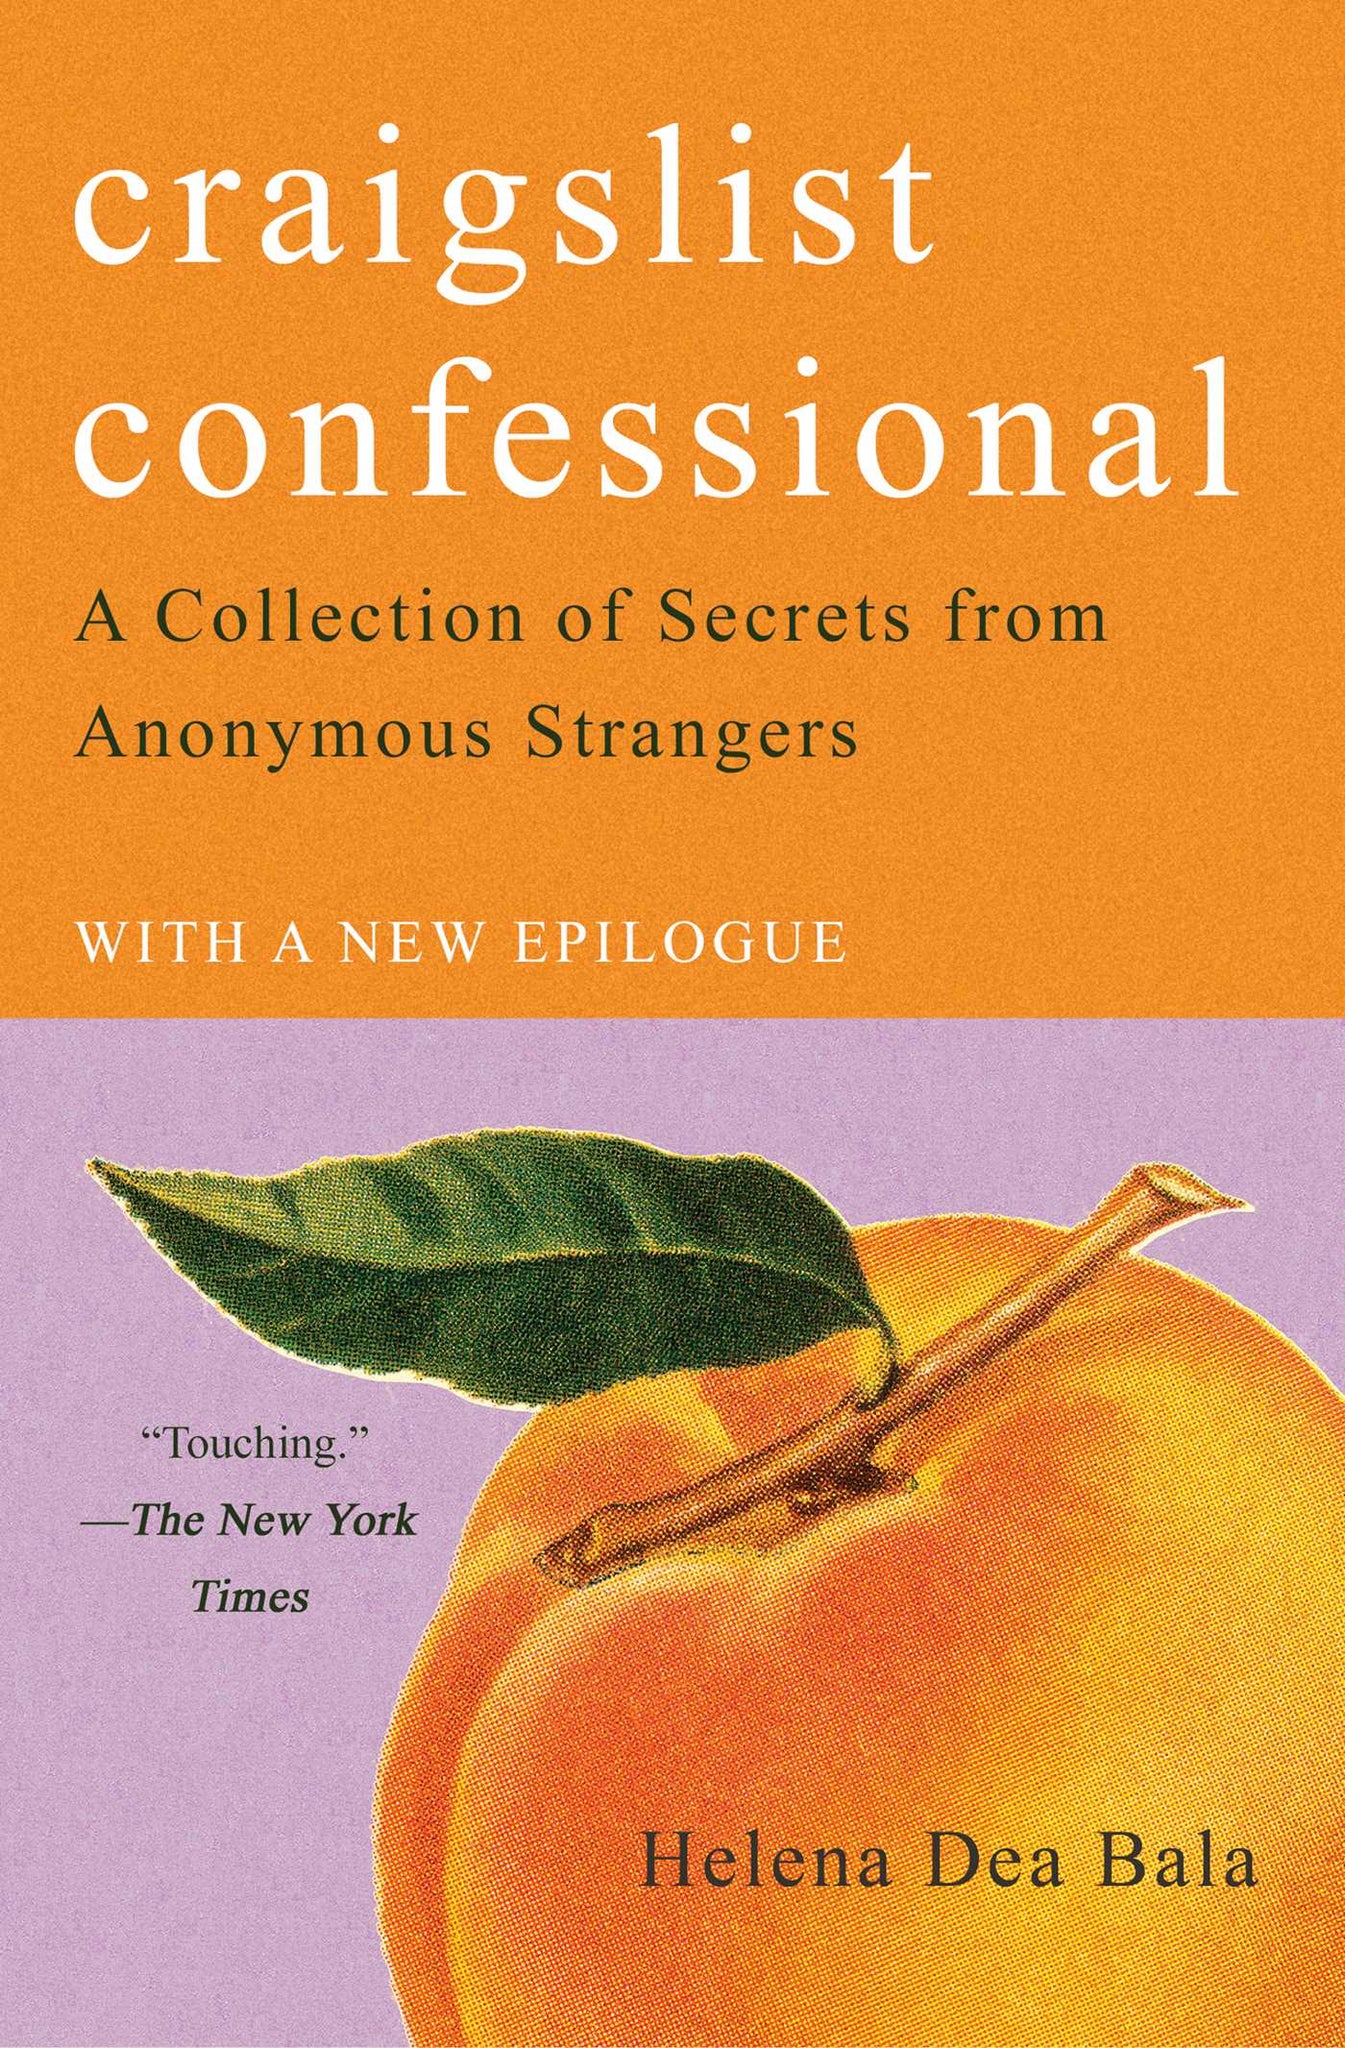 Craigslist Confessional : A Collection of Secrets from Anonymous Strangers